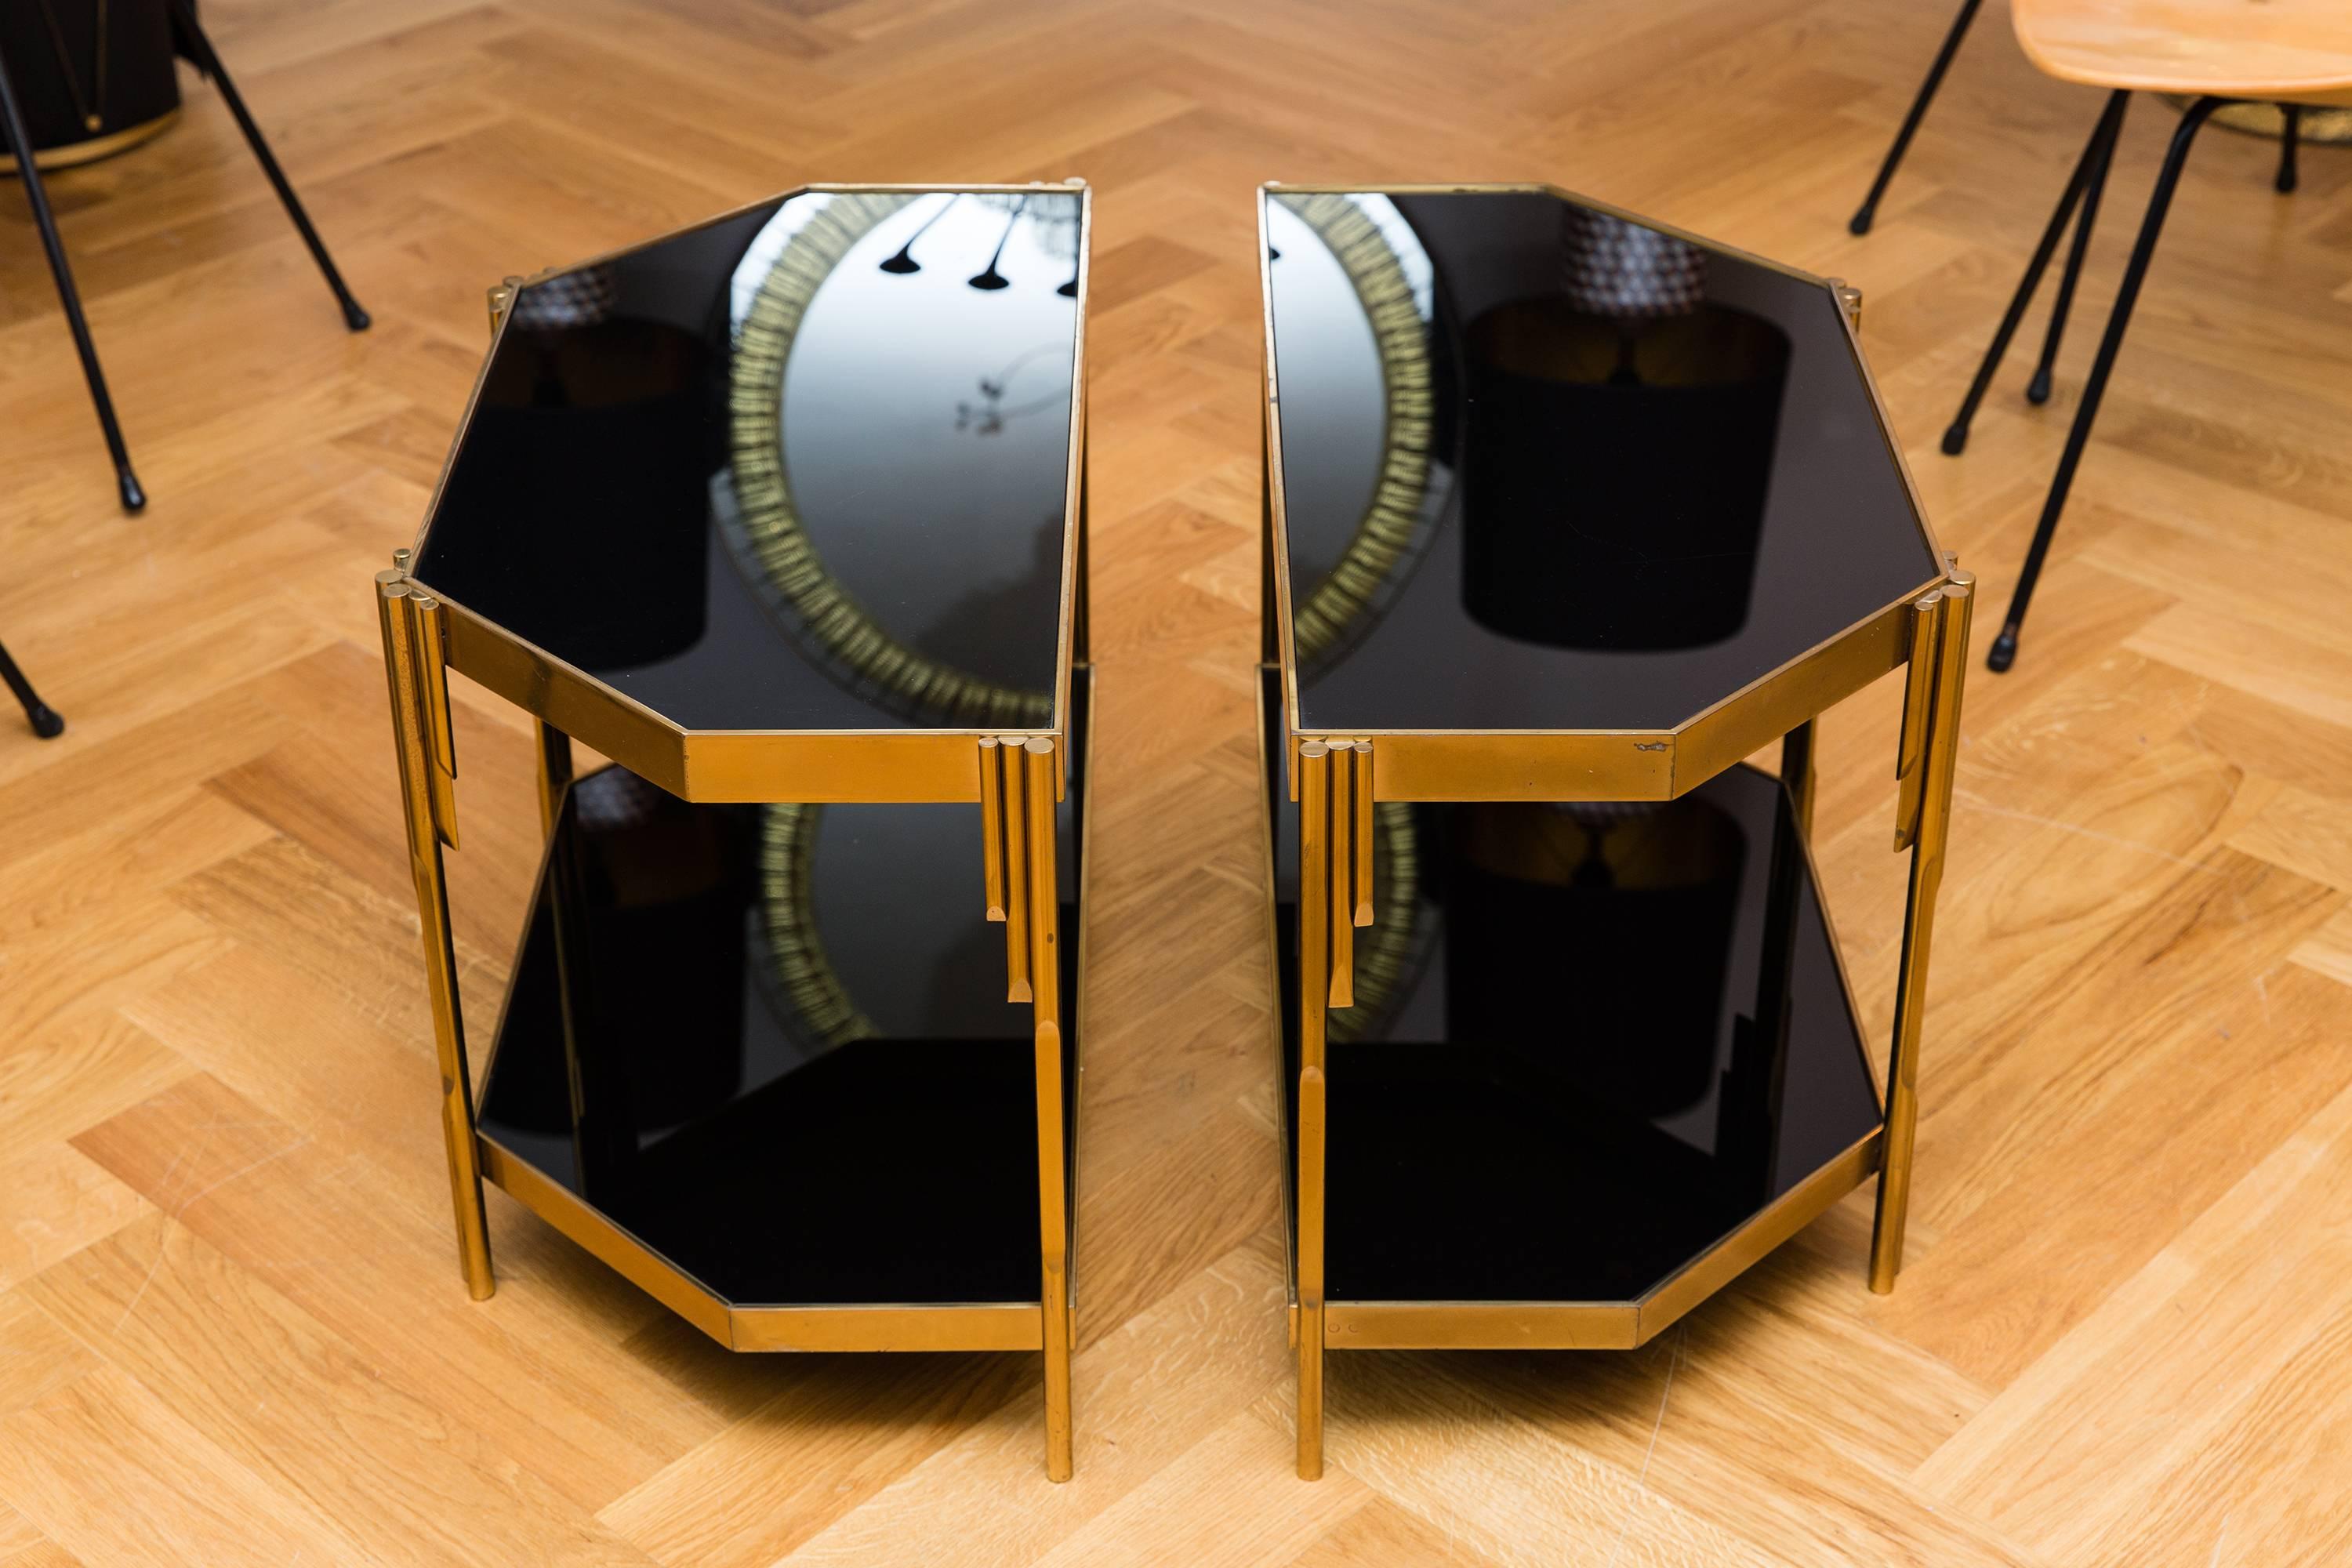 Two occasional tables by Luciano Frigerio, Model Achille, turned brass elements, black opal glass, Manufactured by Frigerio Di Desio, Italy, circa 1970.
Measure: Each height 47 x length 73 x depth 37 cm (together 74 cm)
Good vintage condition,